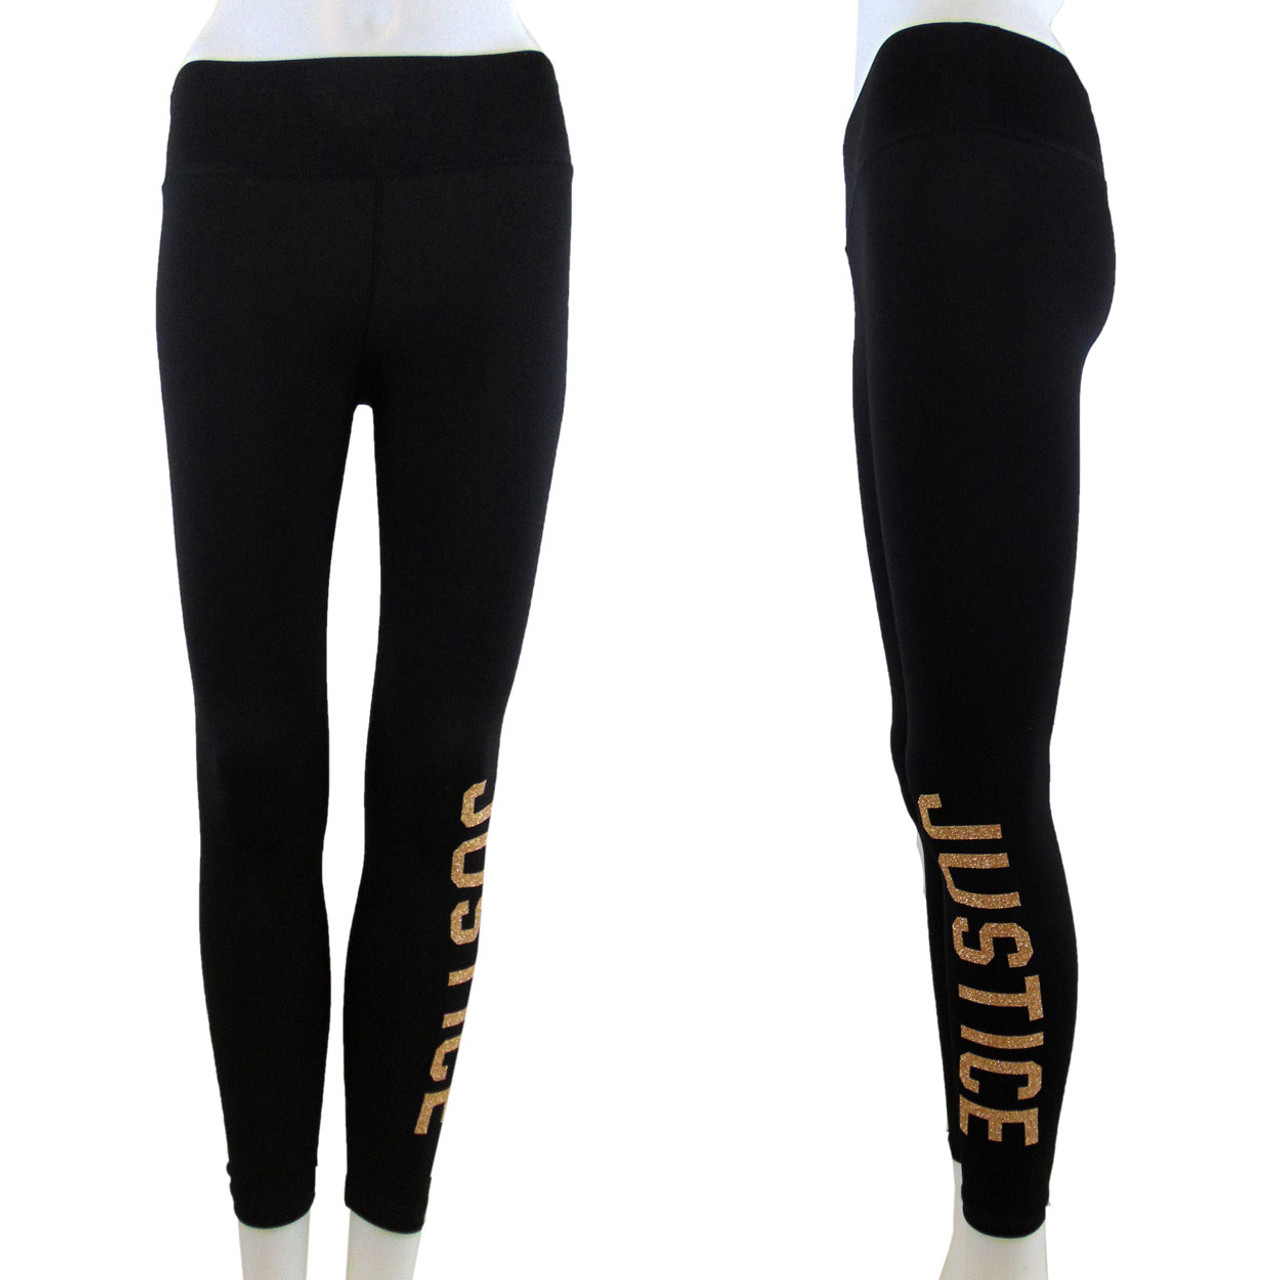 https://cdn11.bigcommerce.com/s-pm7ms50omk/images/stencil/1280x1280/products/2379/13961/justice-leggings__19655.1617132028.jpg?c=2